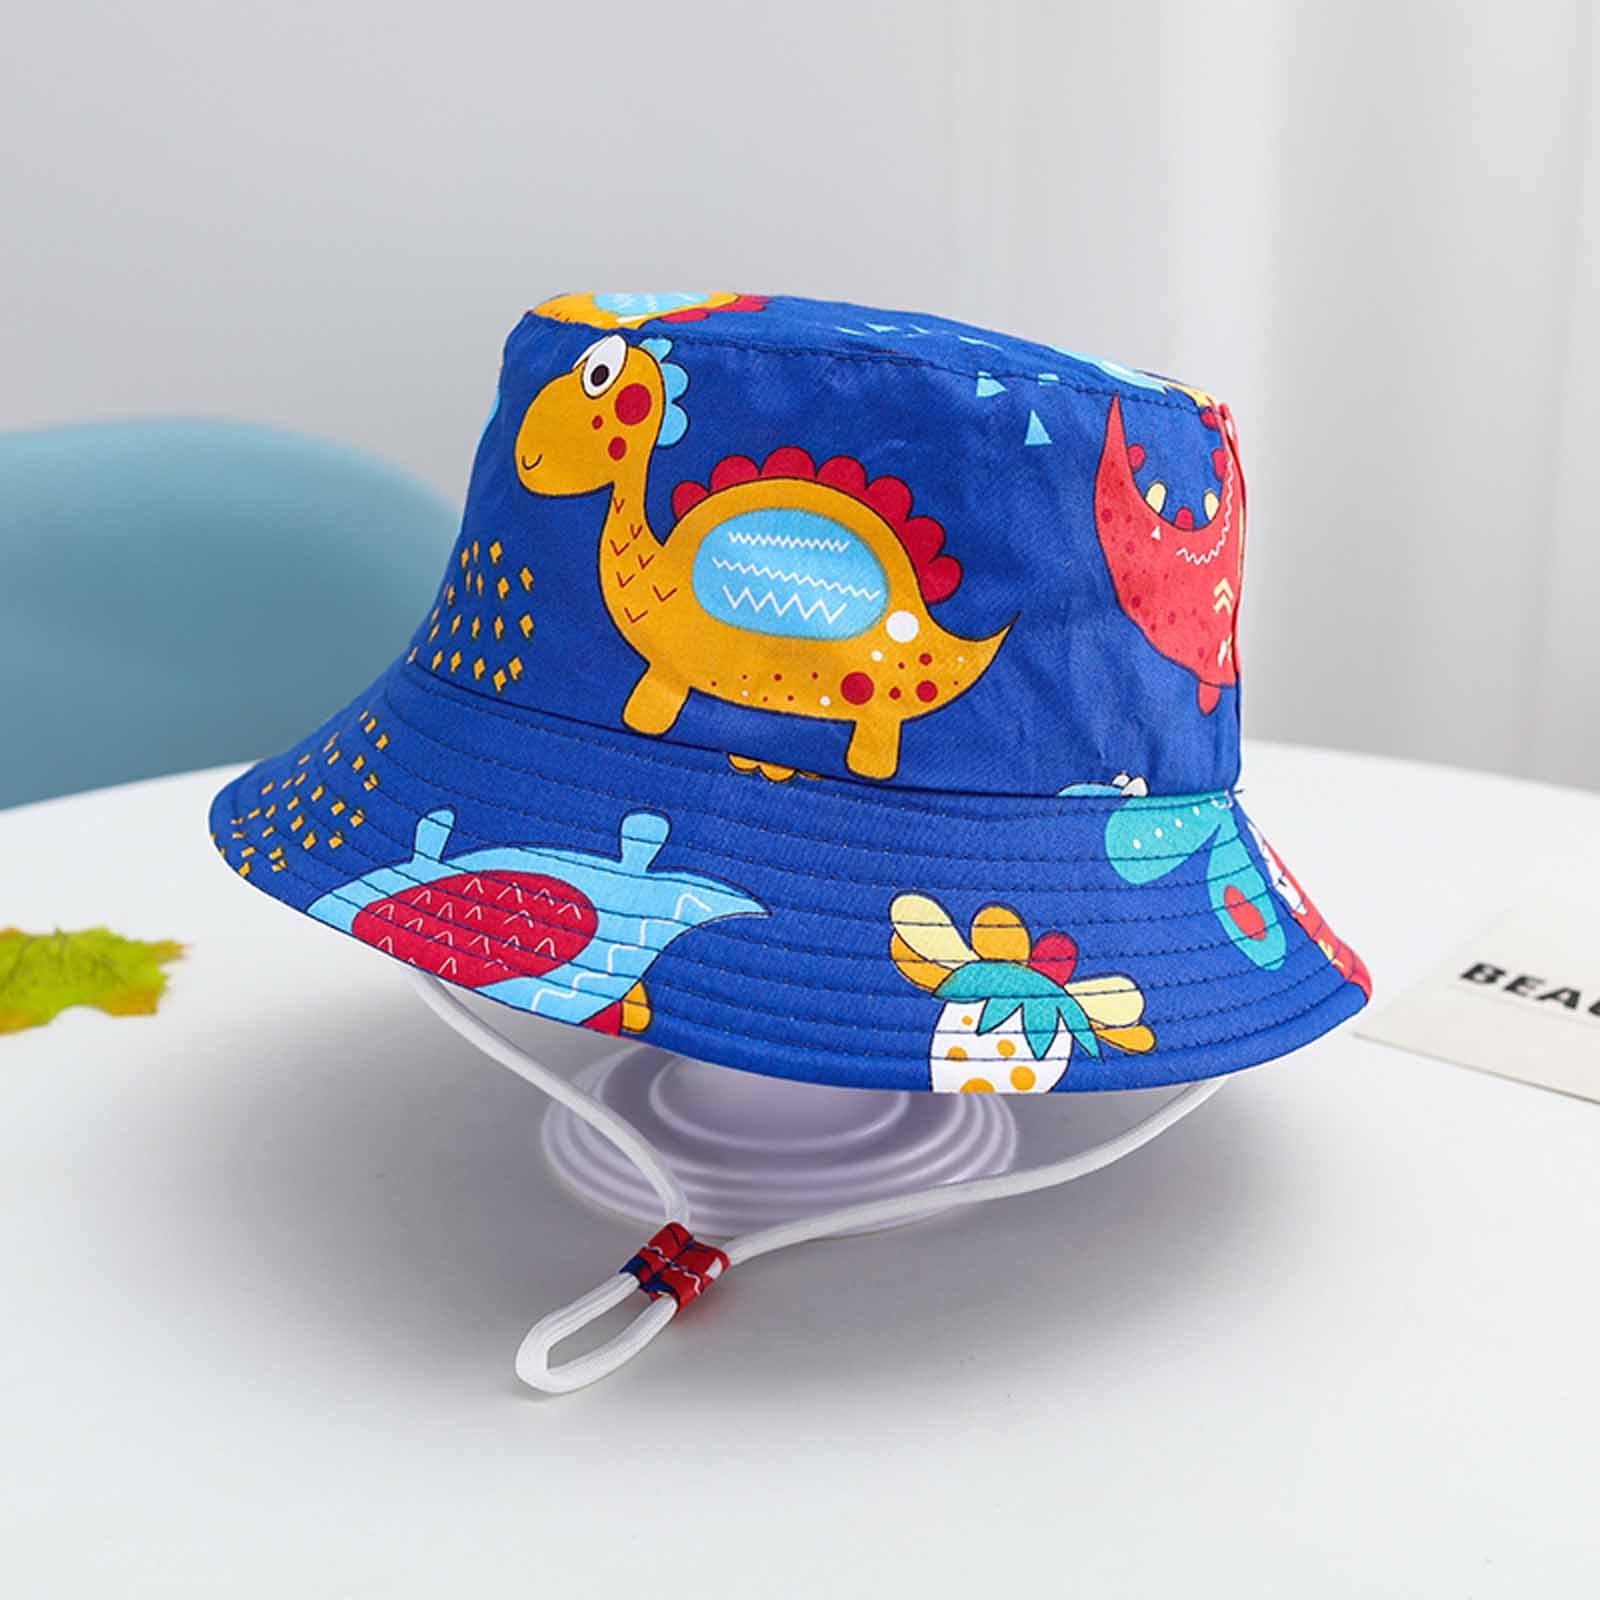 Realhomelove UPF 50+ Beach Baby Sun Hat Sun Protection Cute Wide Brim  Summer Baby Boy Bucket Hats Toddler Sun Hats for Girl 